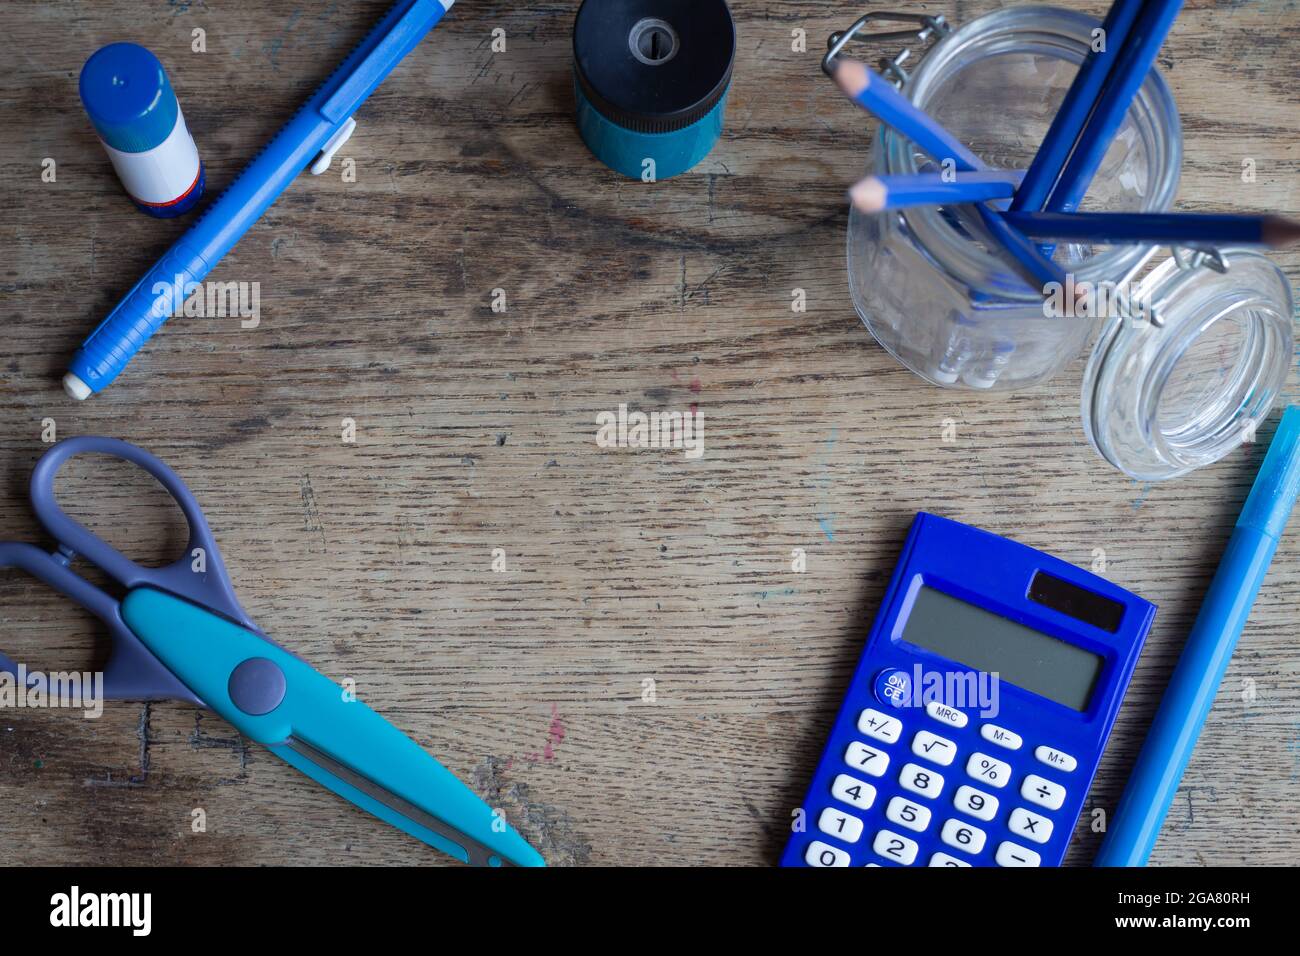 blue coloured school supplies on vintage wood desk top, including scissors, calculator, pencils, glue eraser and pencil sharpener, with copy space Stock Photo